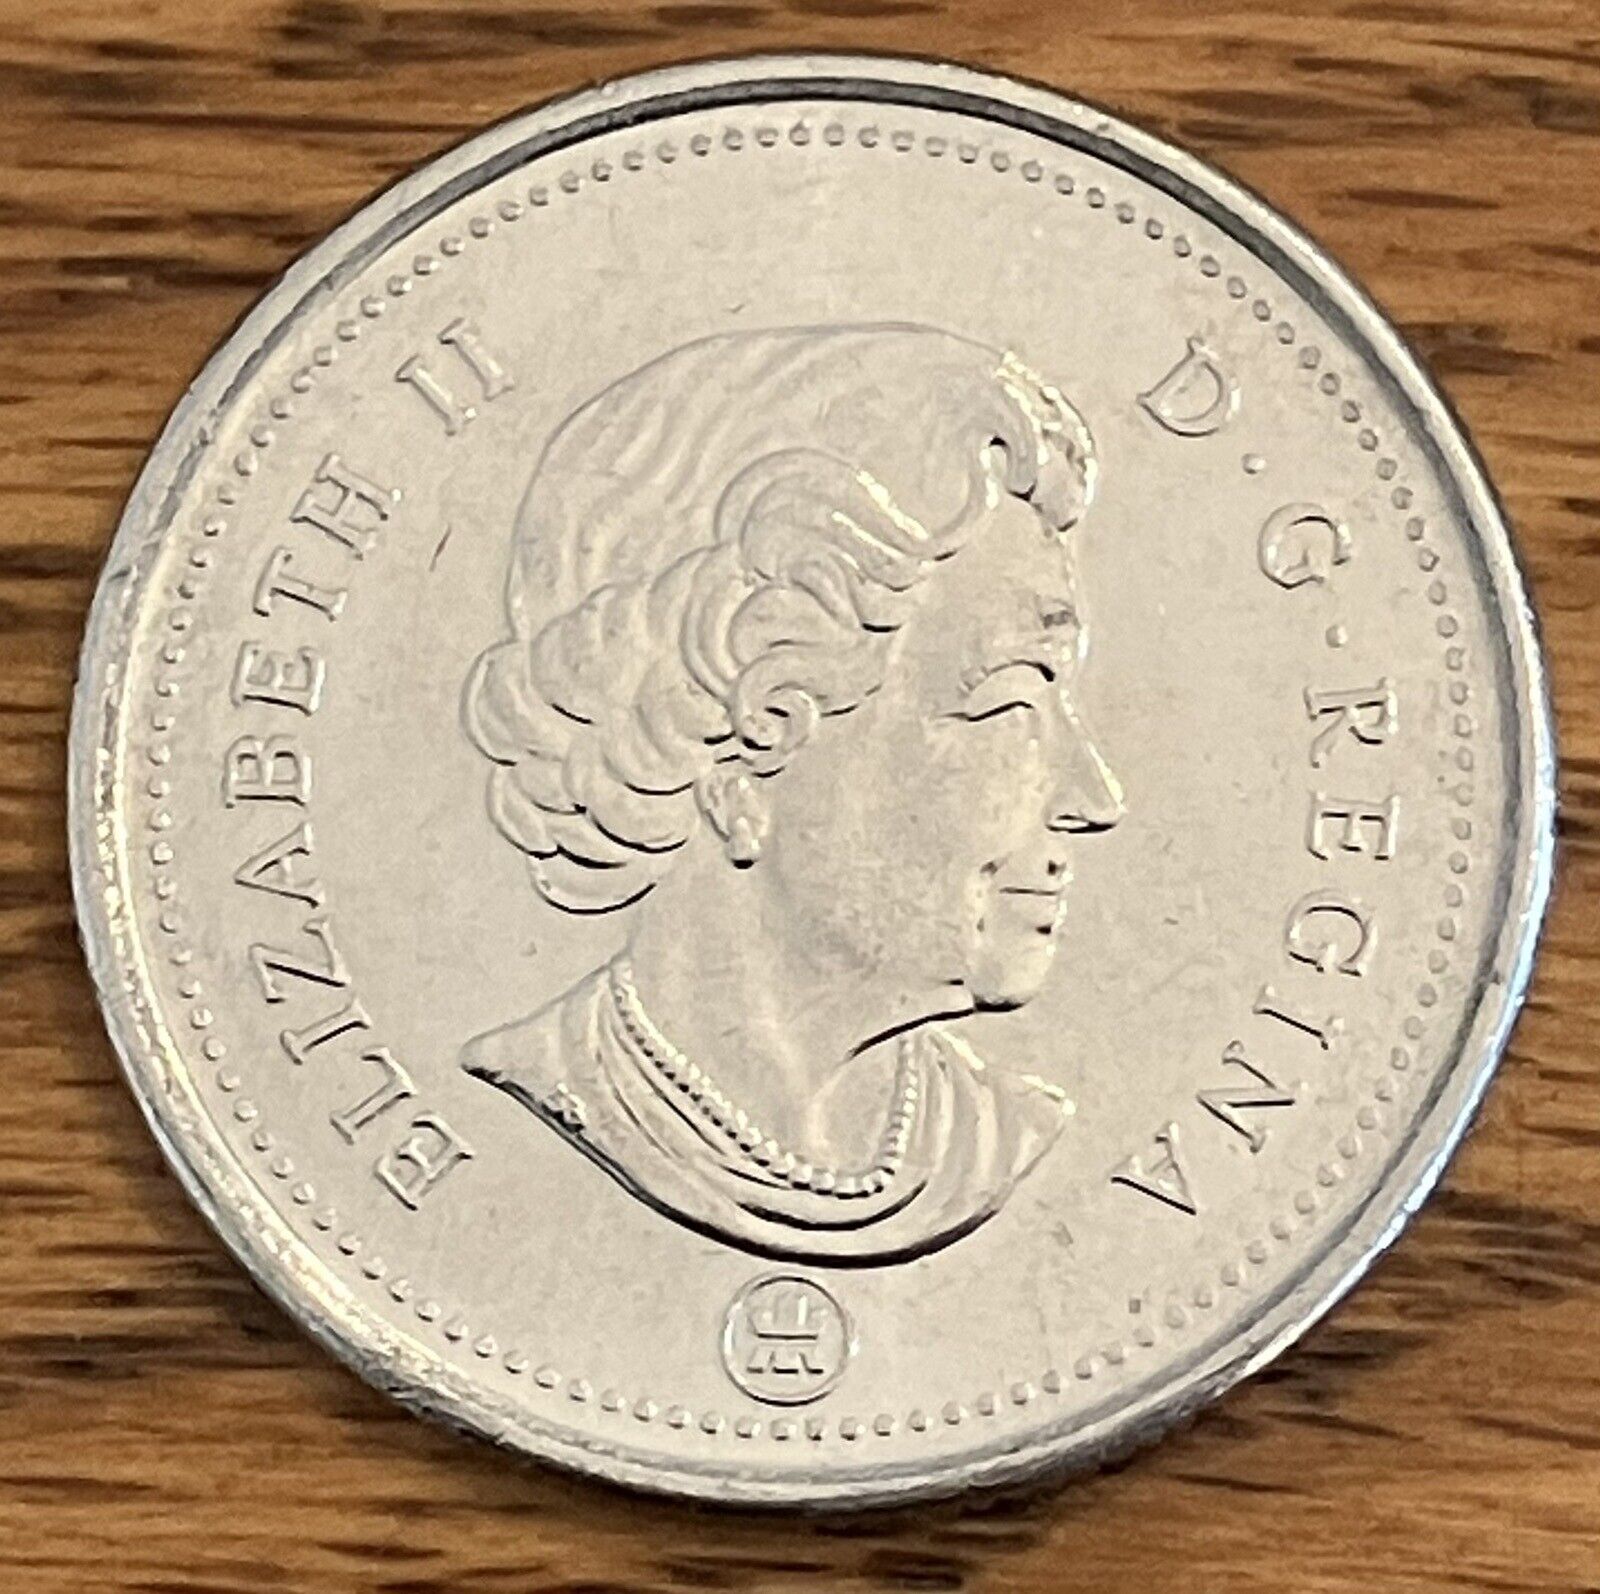 2018 Canada 25 cents quarter **75% off combined shipping**